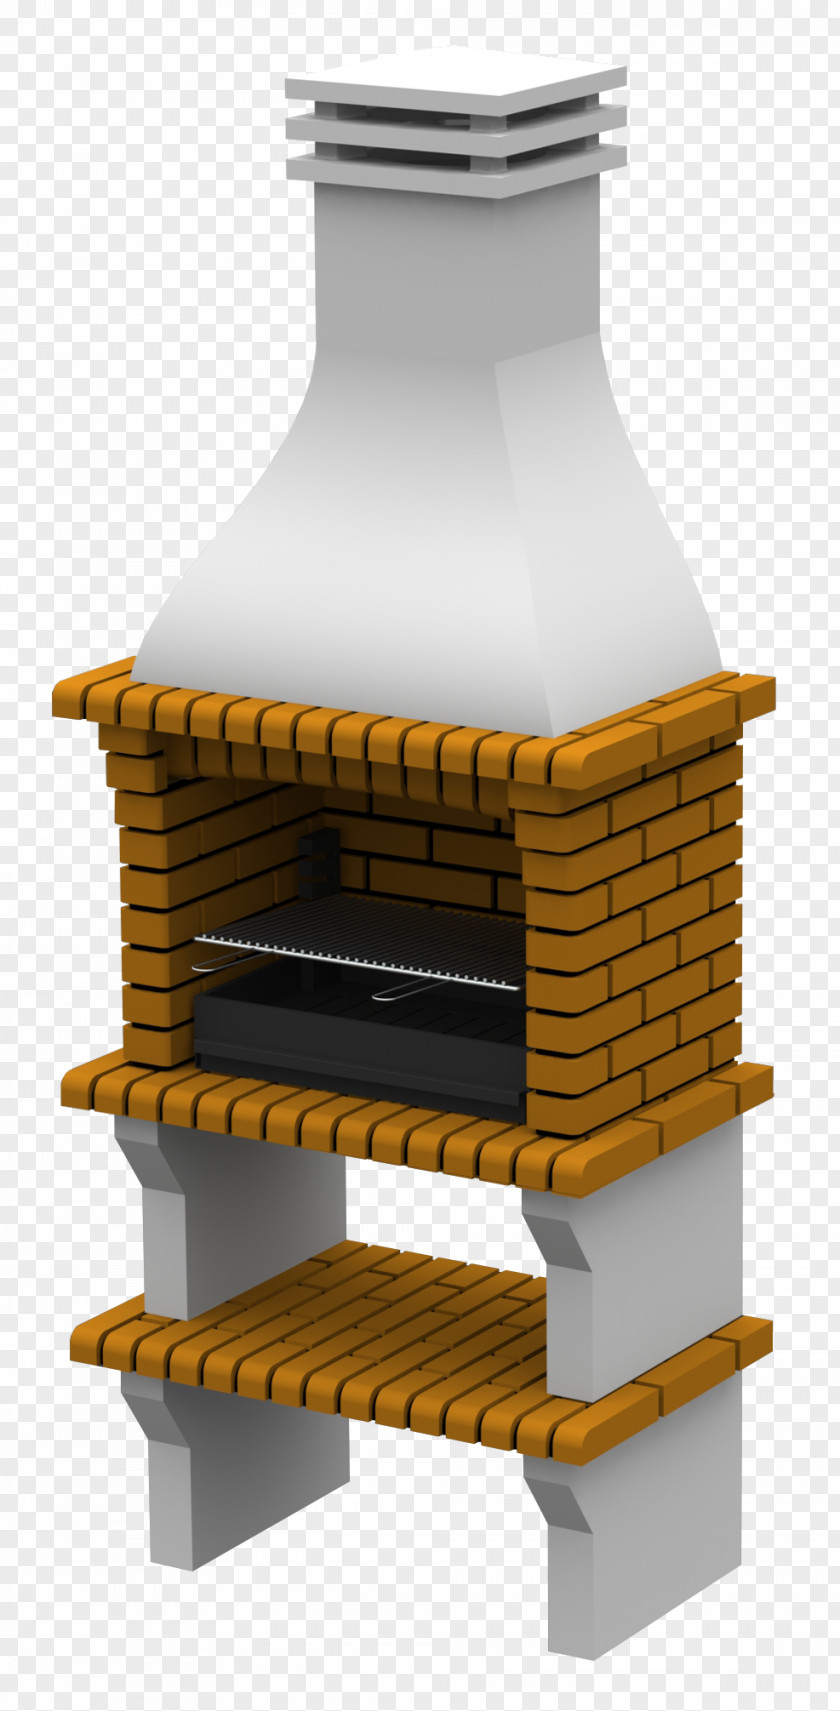 Barbecue Fire Brick Charcoal Firewood PNG